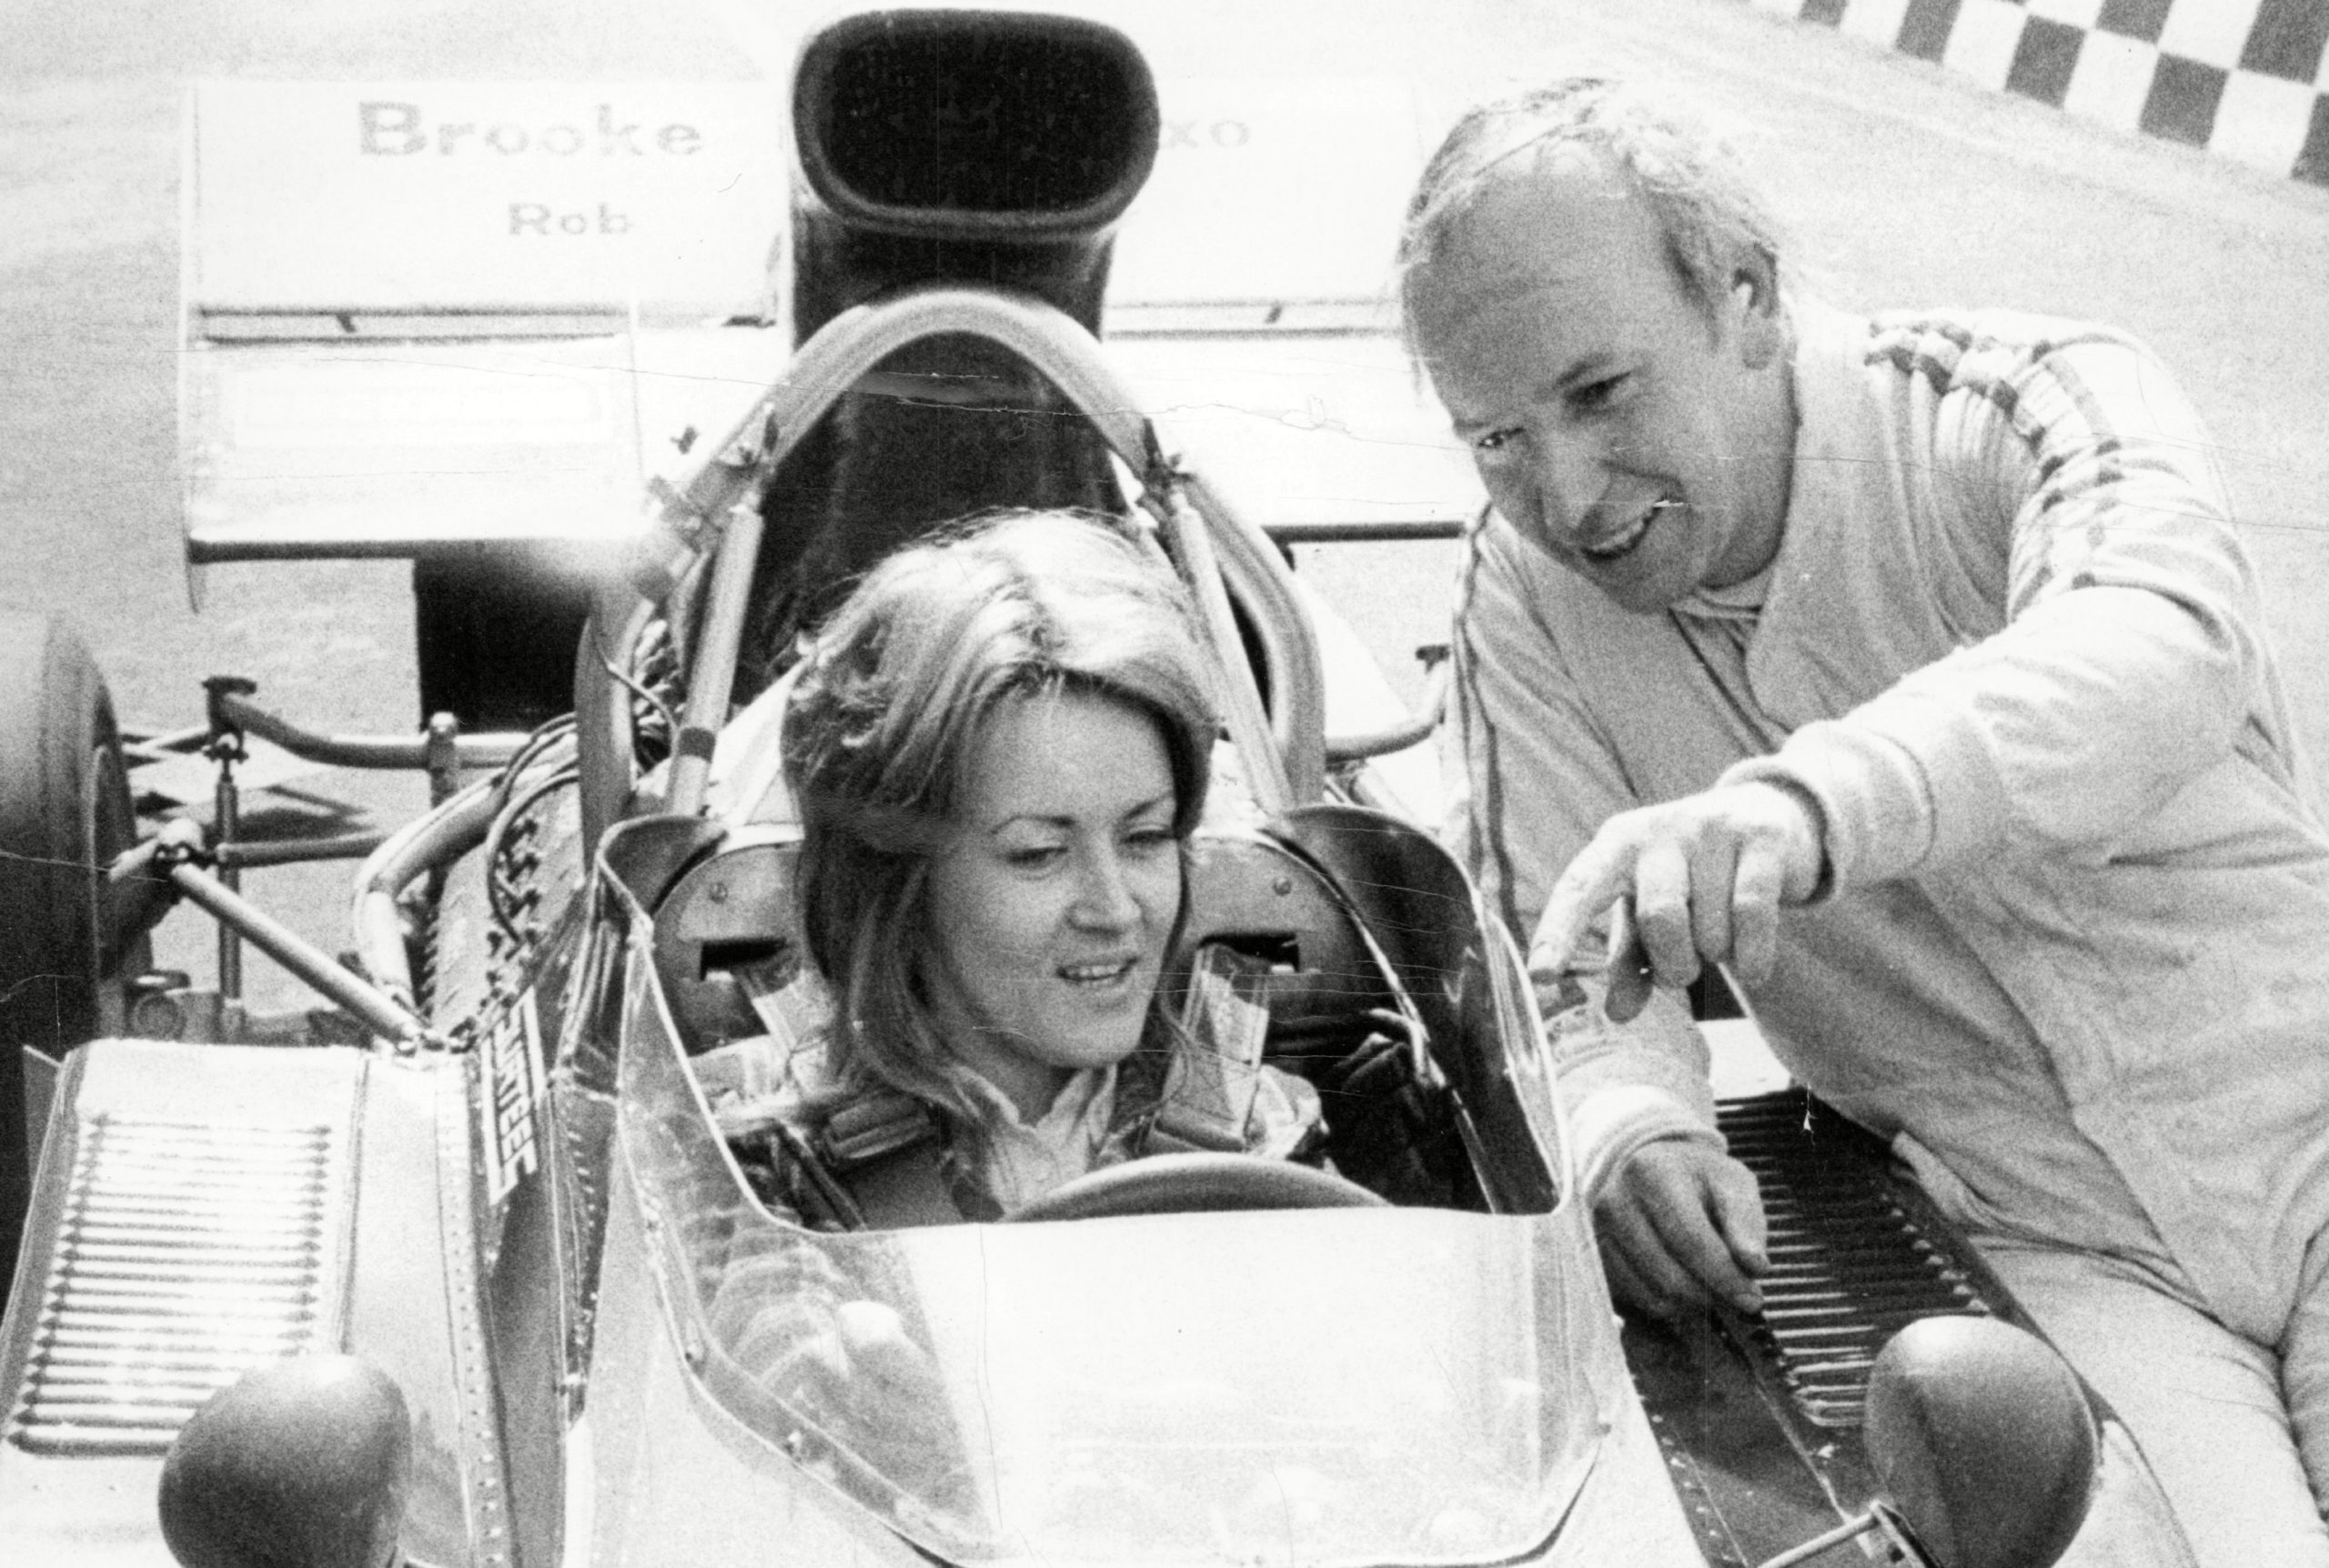 Obituary: The rise of Sue Baker - from Brands Hatch reporter to Top Gear presenter